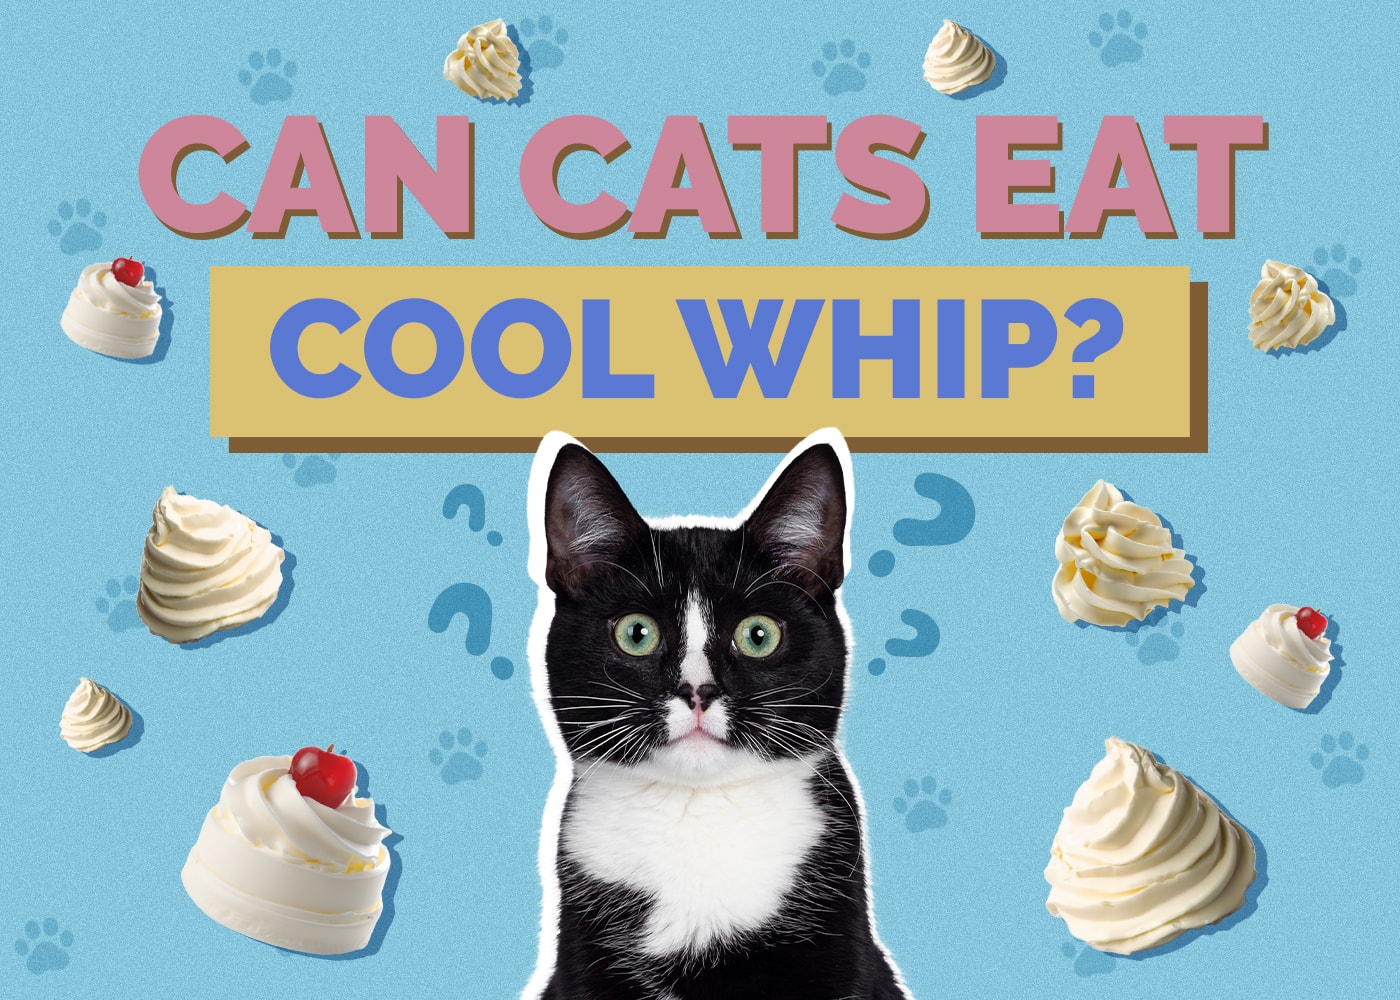 Can Cats Eat cool-whip